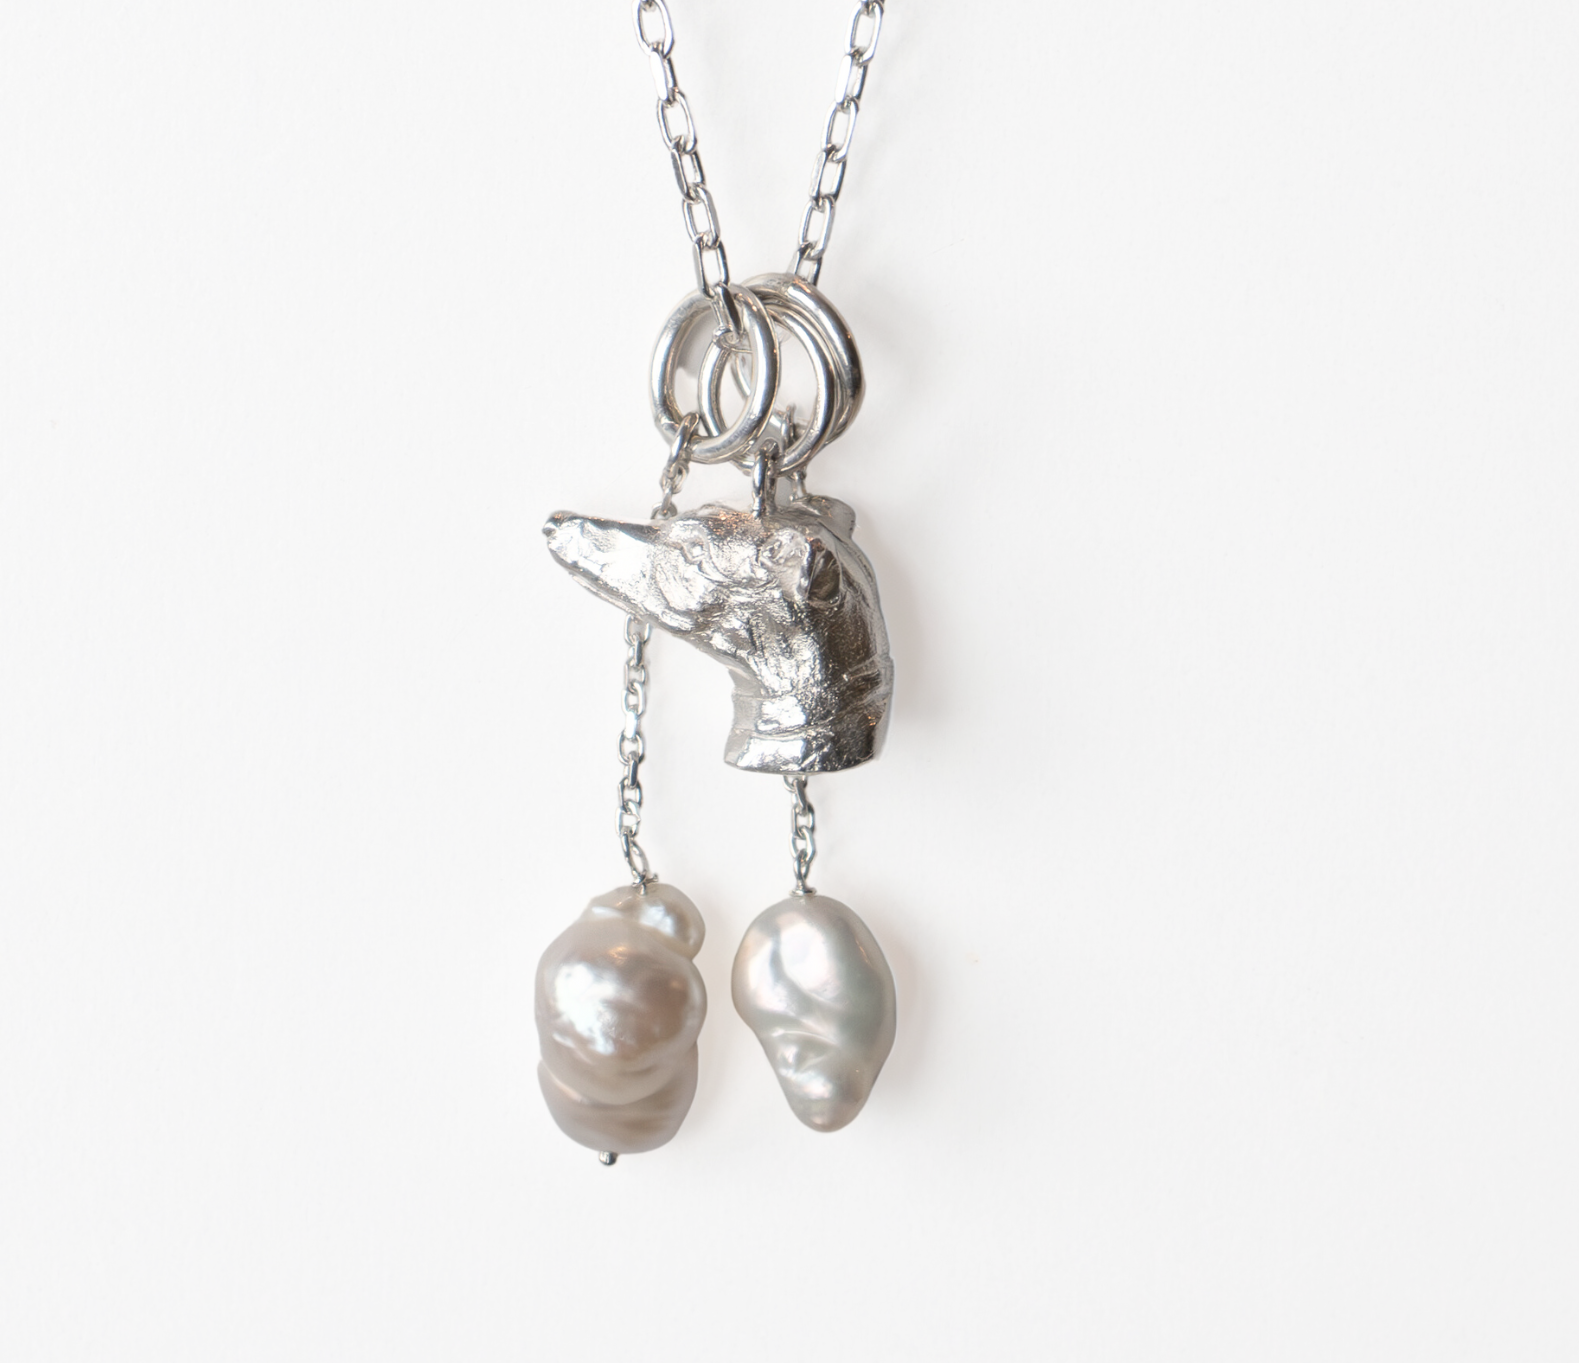 Greyhound Pendant with Freshwater Pearl Drops by Paul Eaton Sculptor/Silversmith